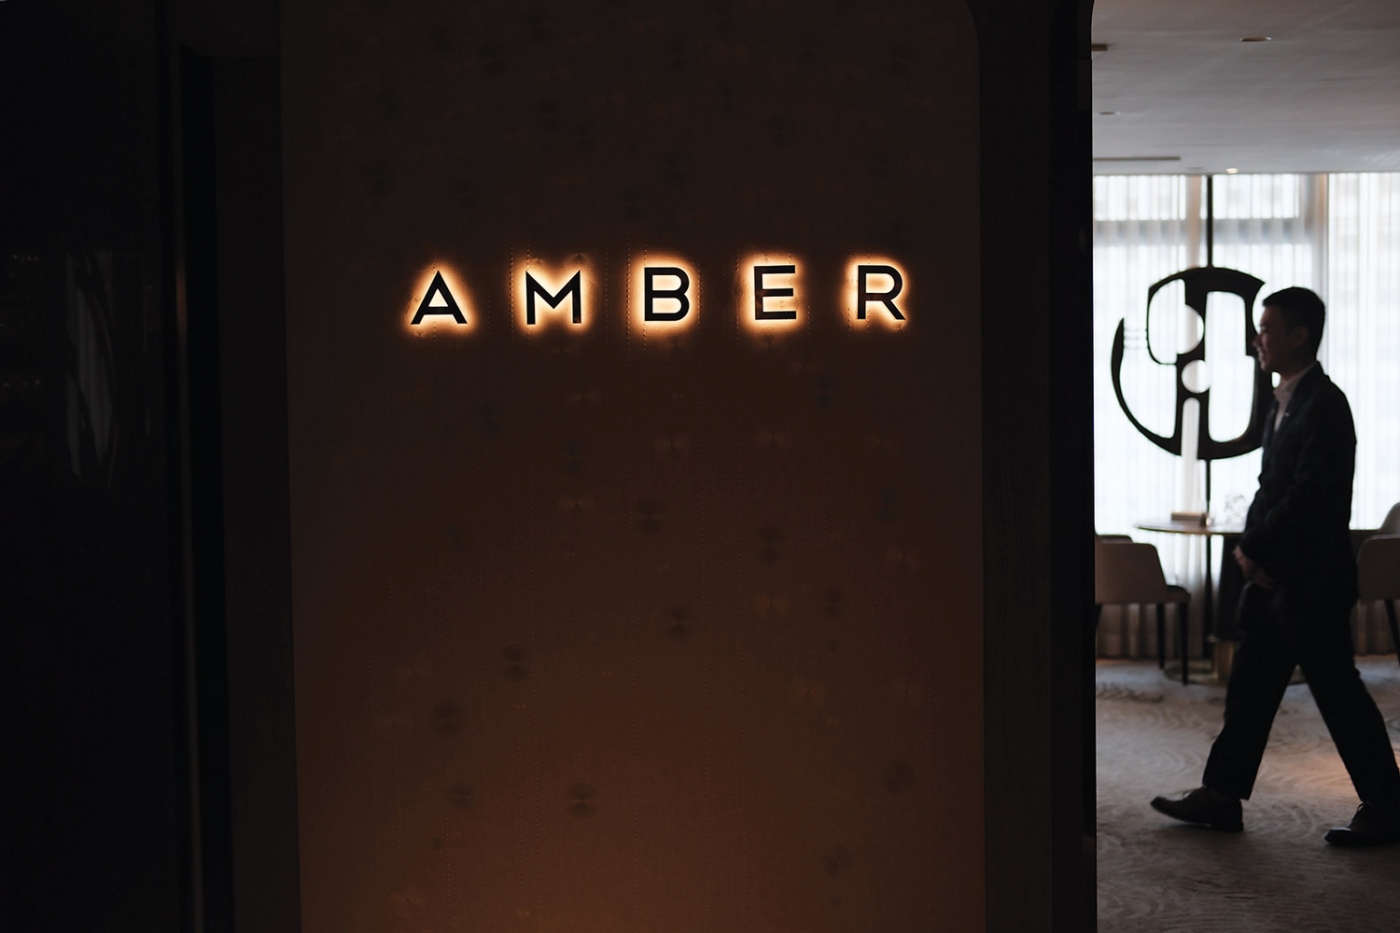 Amber is forever on the bookmark list of every visitor to Hong Kong.